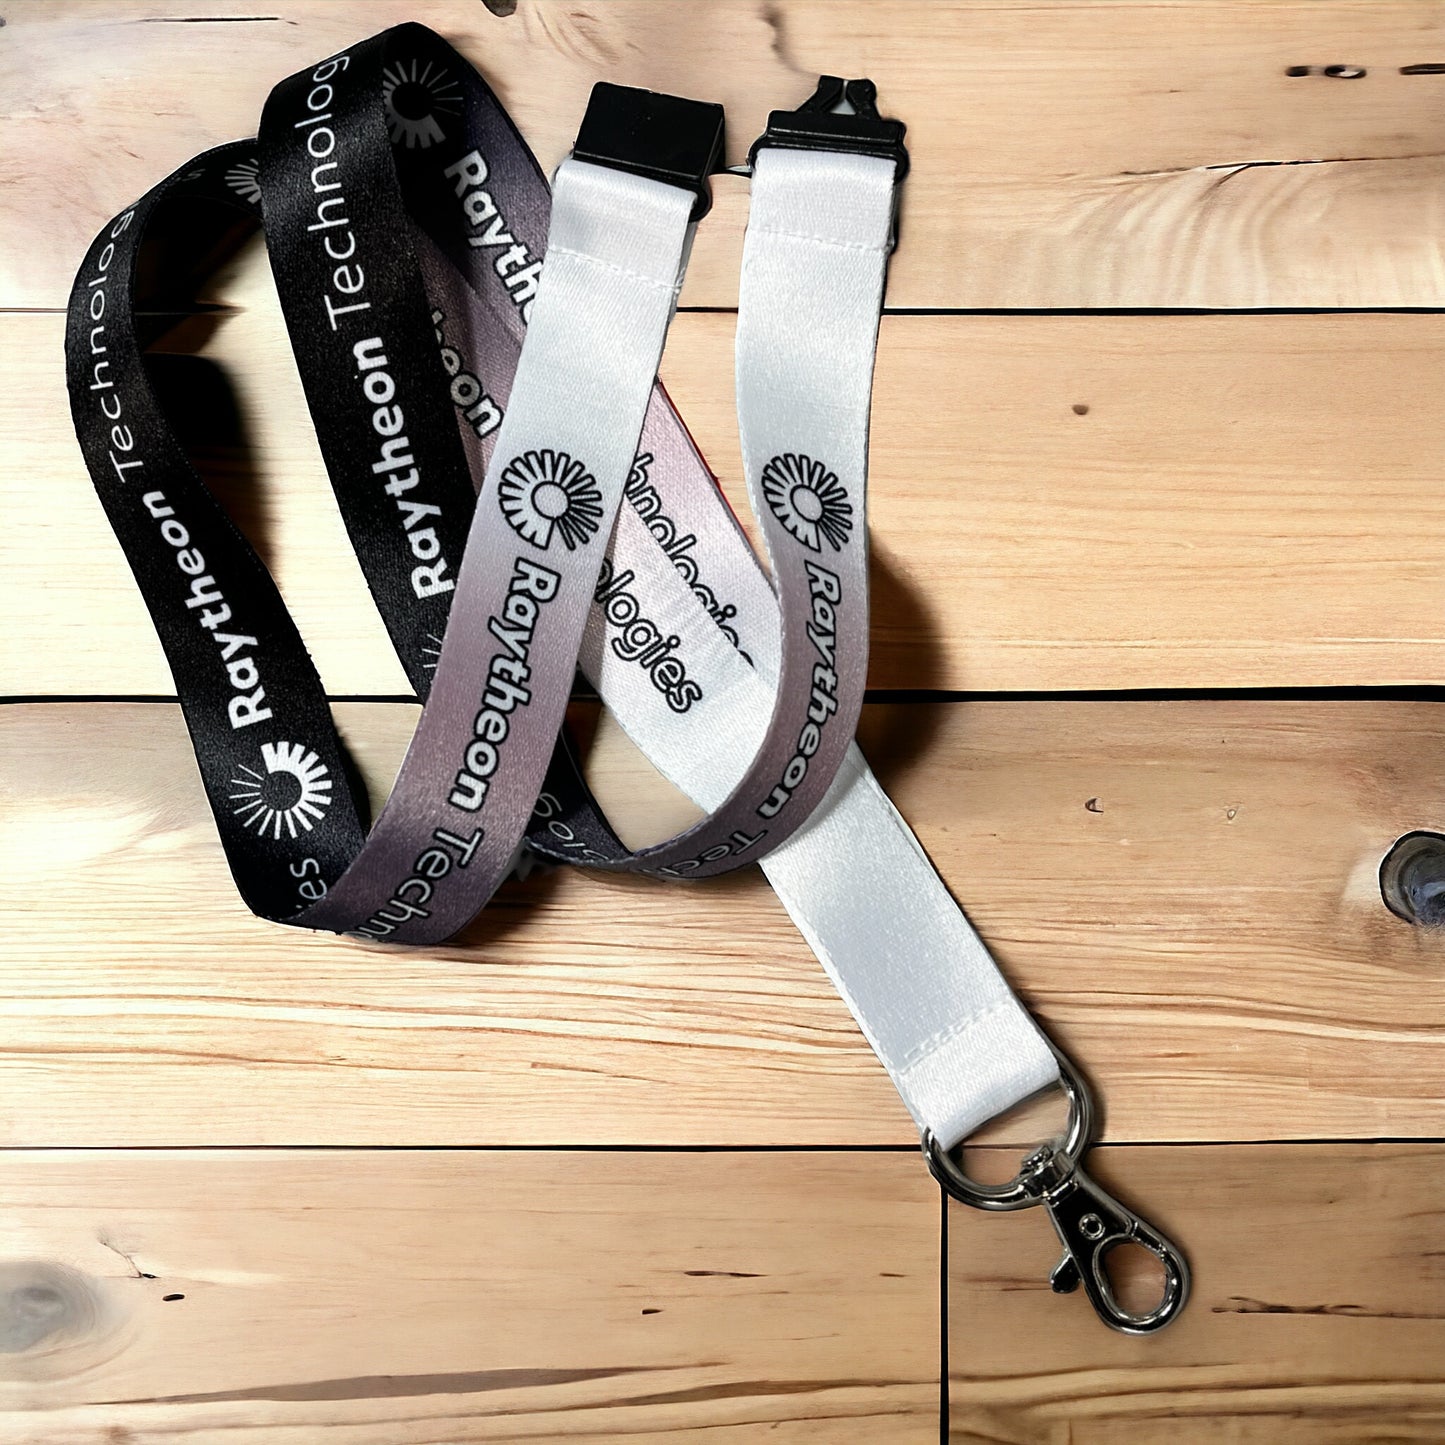 Customized Business Logo Promotional Event Lanyards - Personalized Convention Badge Holders - Bulk Discounts Available